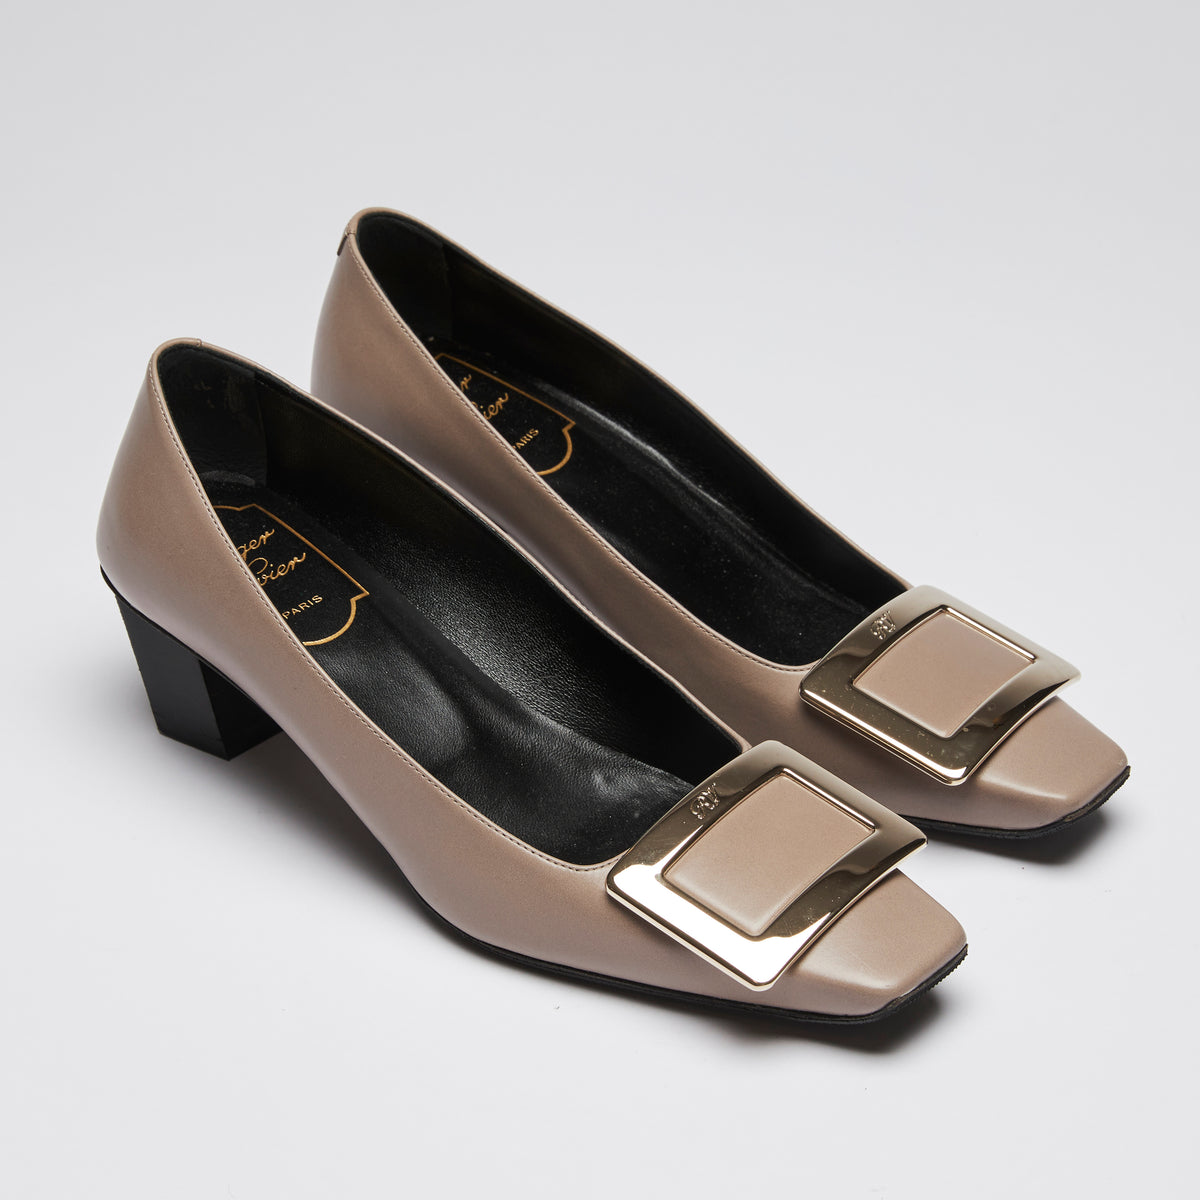 Pre-Loved Taupe Smooth Leather Square Toe Kitten Heels with Black Leather Lining and Silver Buckle Ornament.(front)